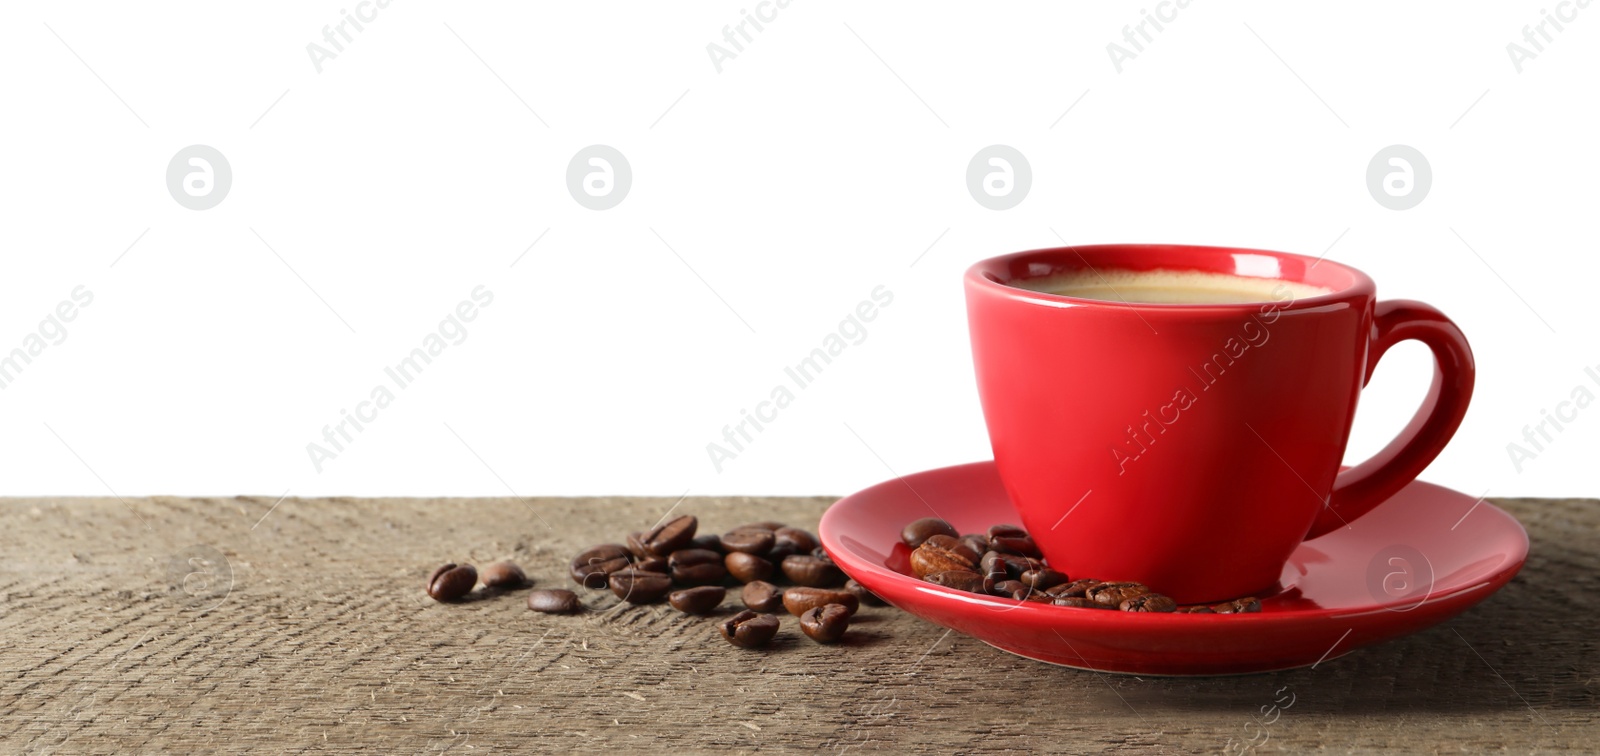 Photo of Cup of aromatic coffee and beans on wooden table against white background